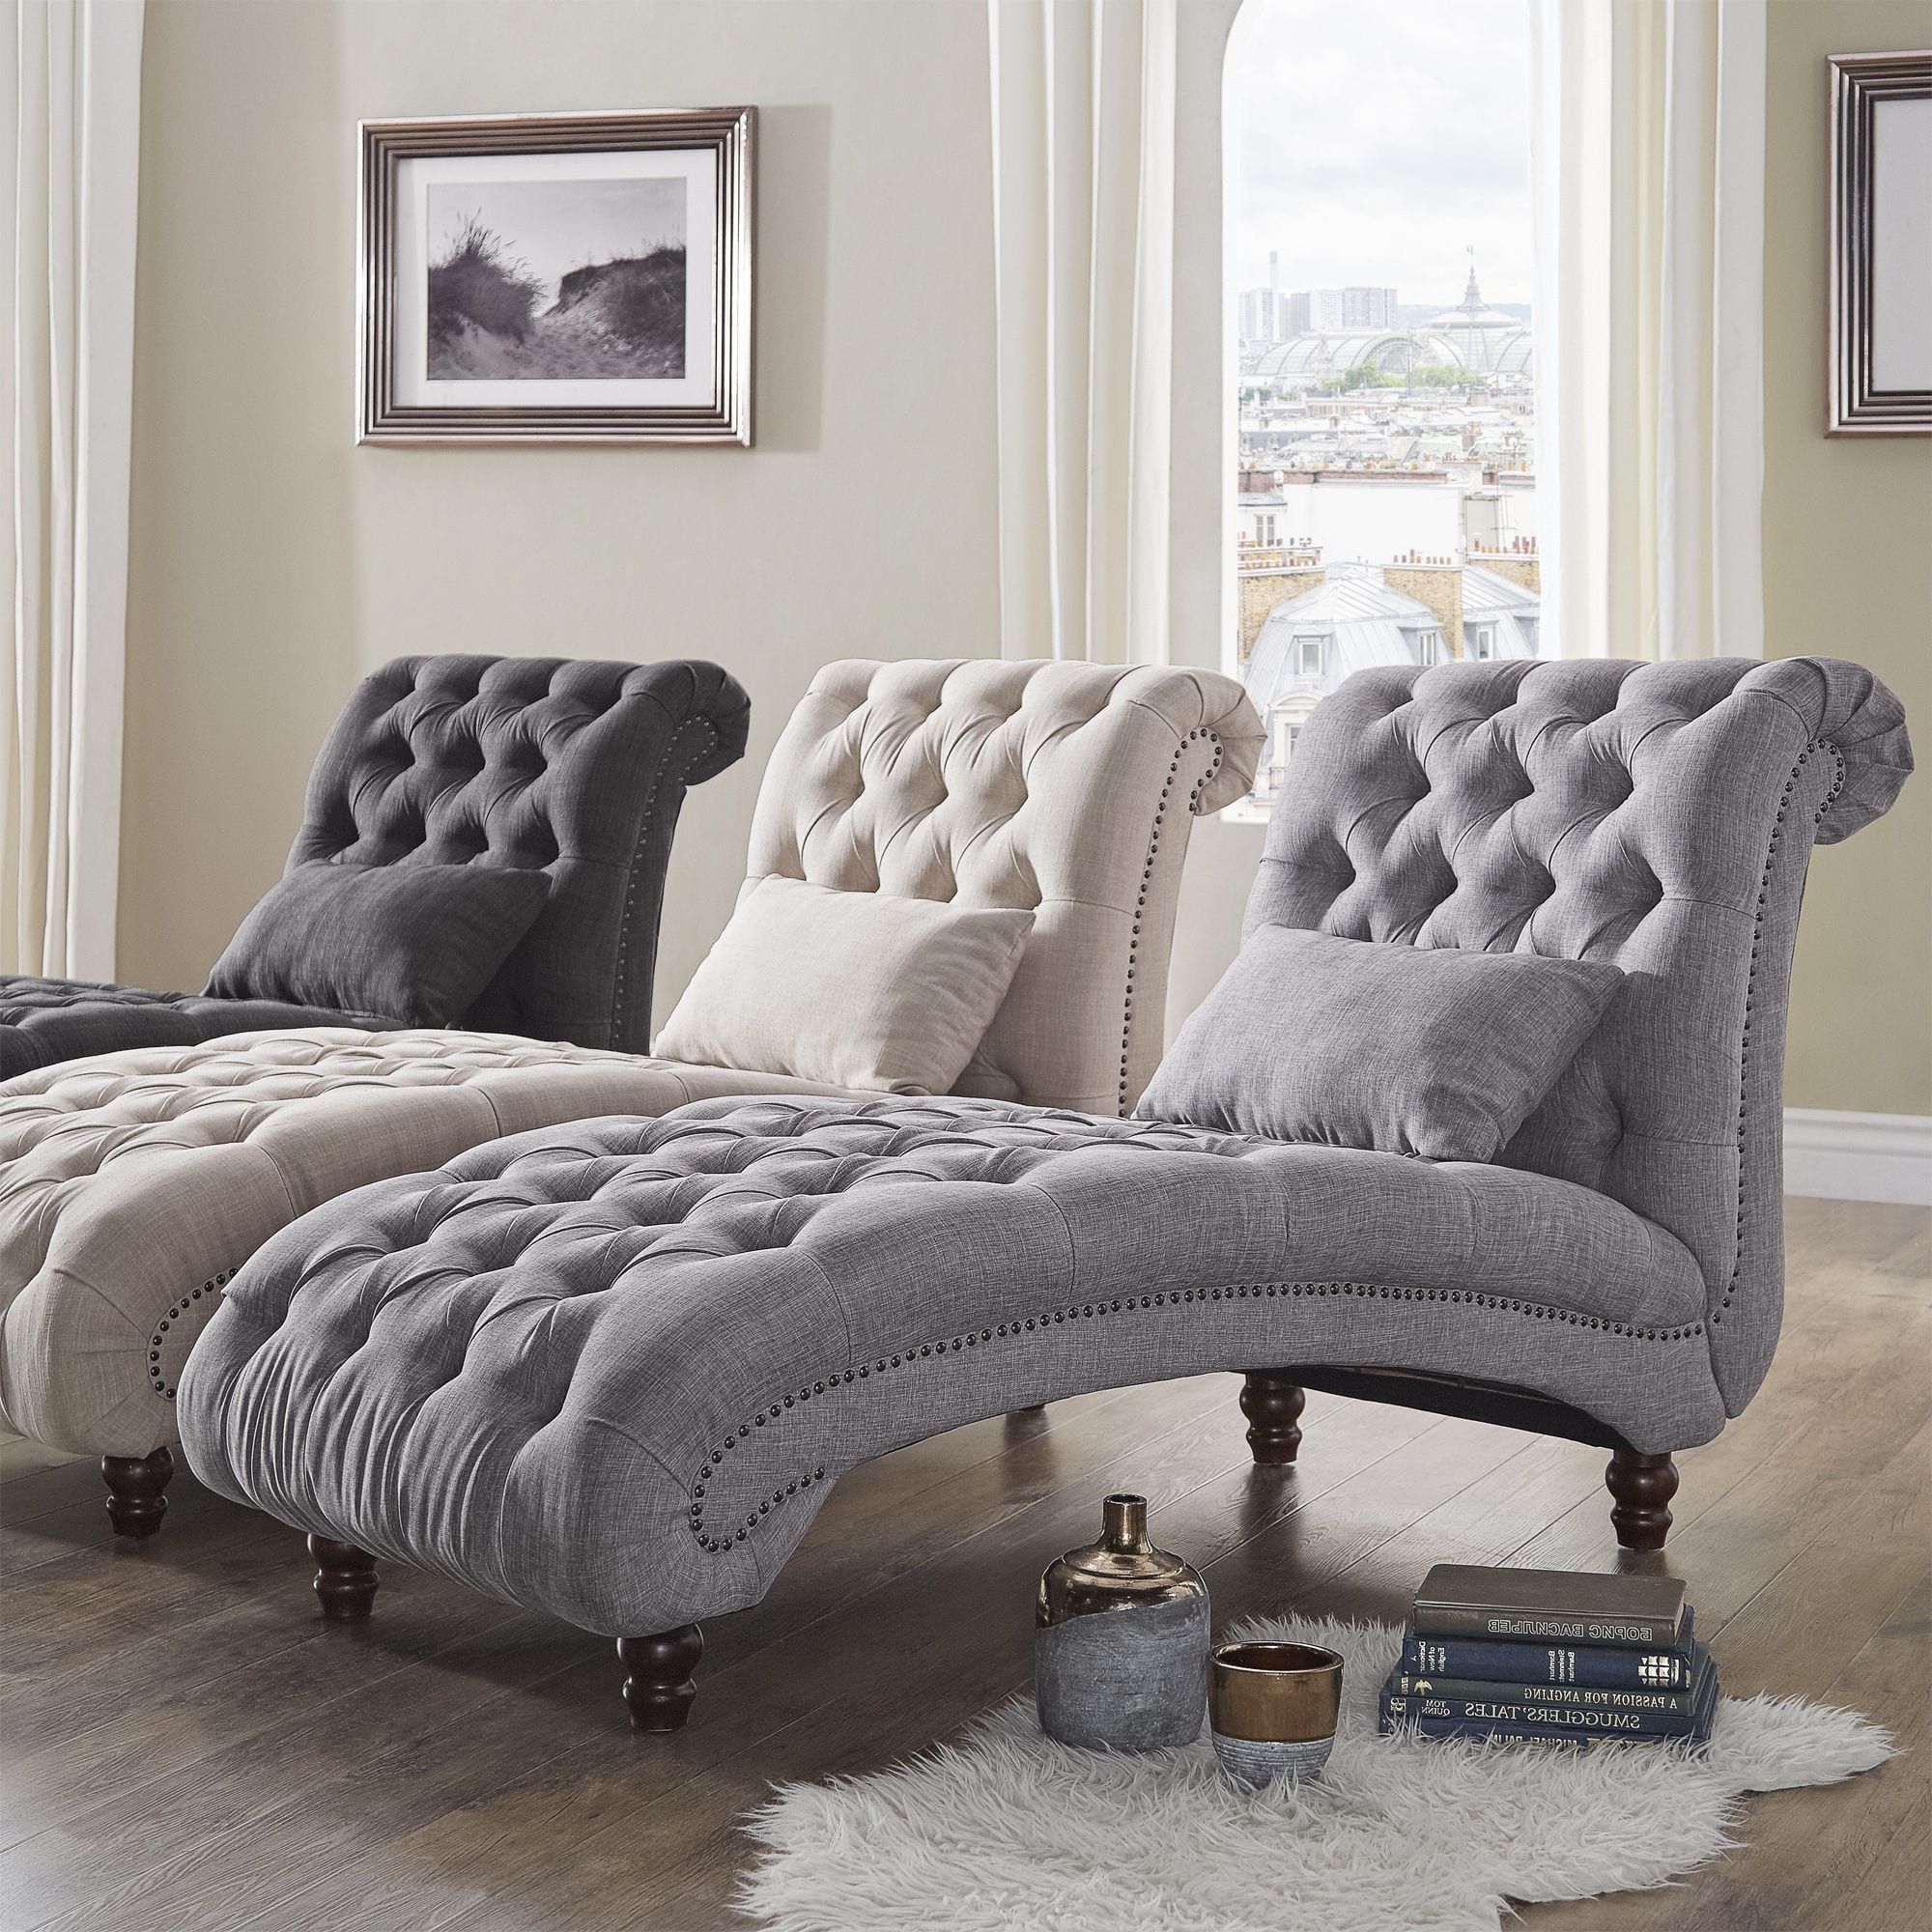 Most Current Overstock Chaise Lounges For Knightsbridge Tufted Oversized Chaise Loungeinspire Q Artisan (View 1 of 15)